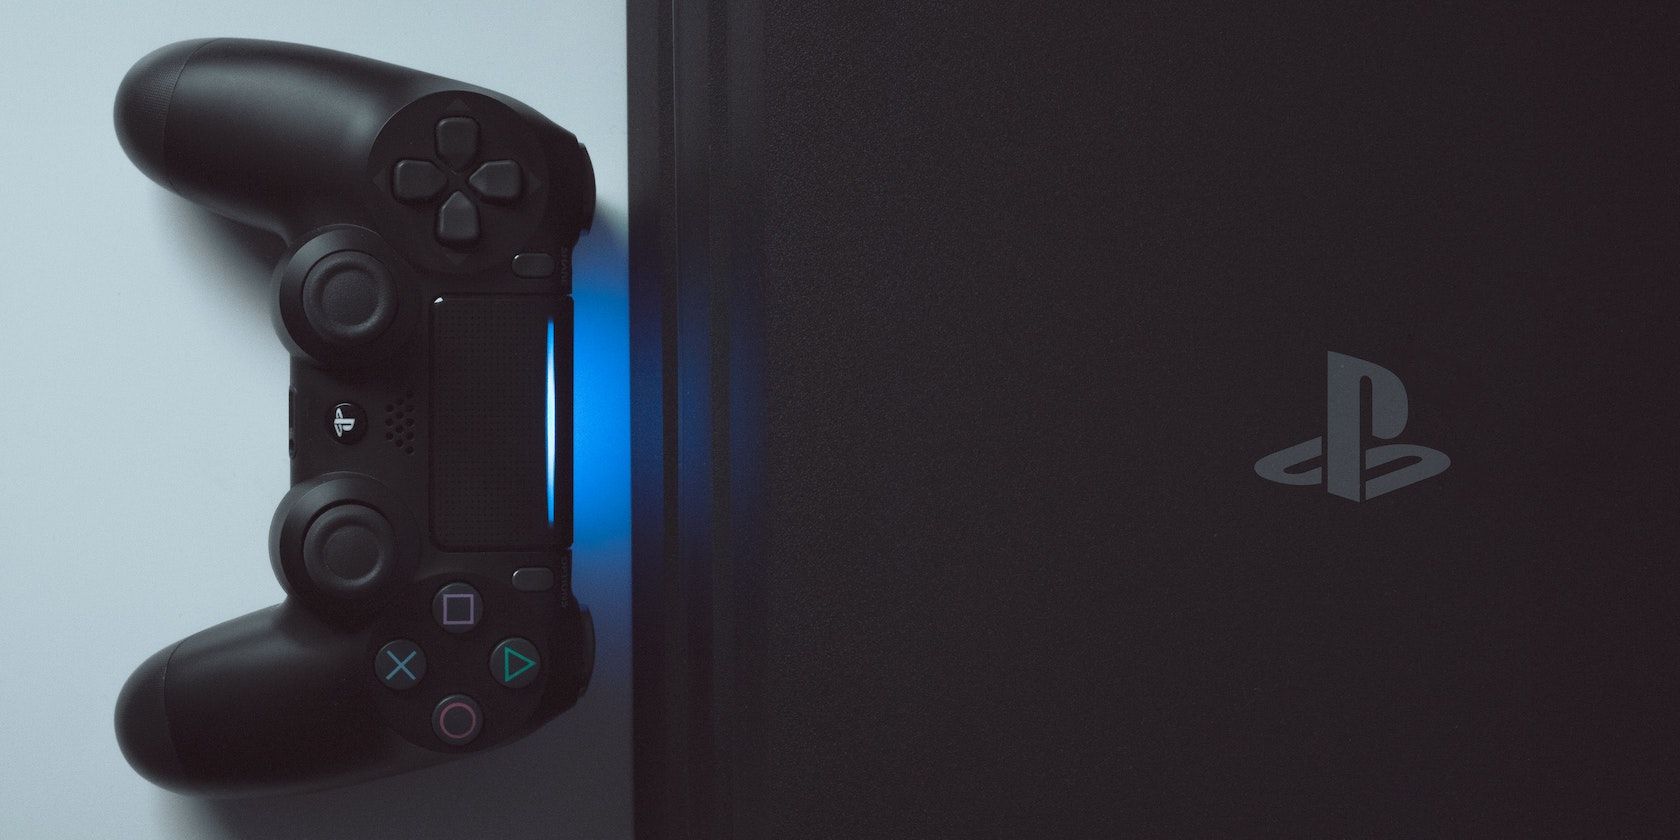 A PS4 console and controller emitting a blue light